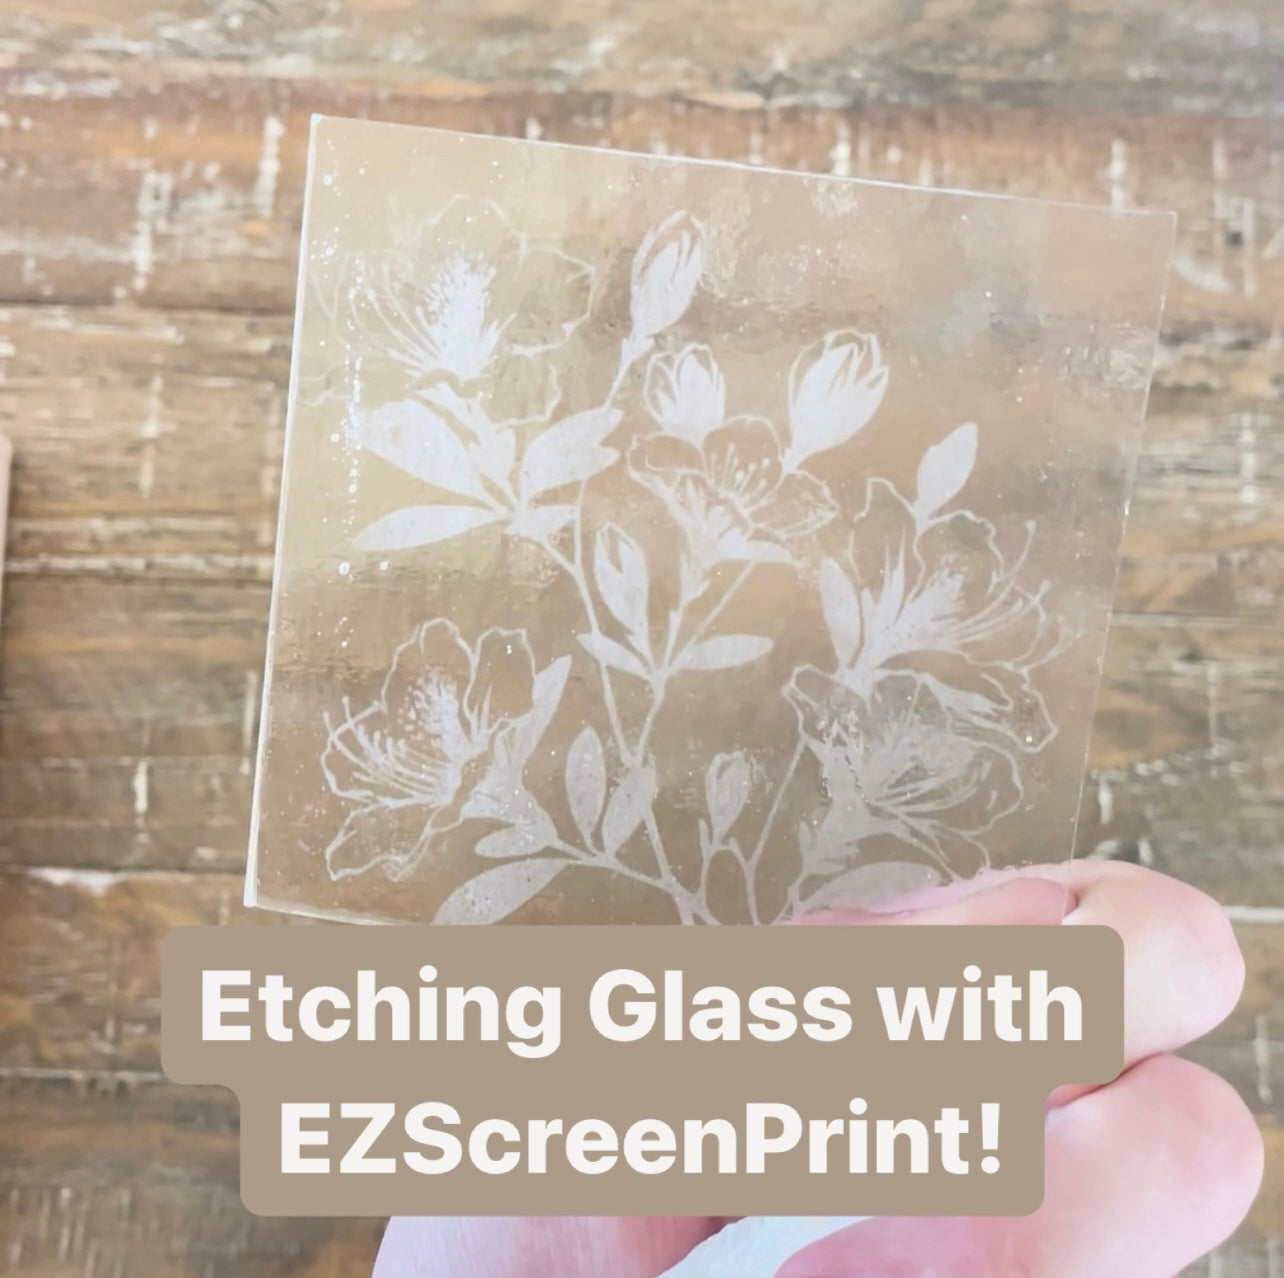 How to Etch on Glass with a Silk Screen Printing Stencil